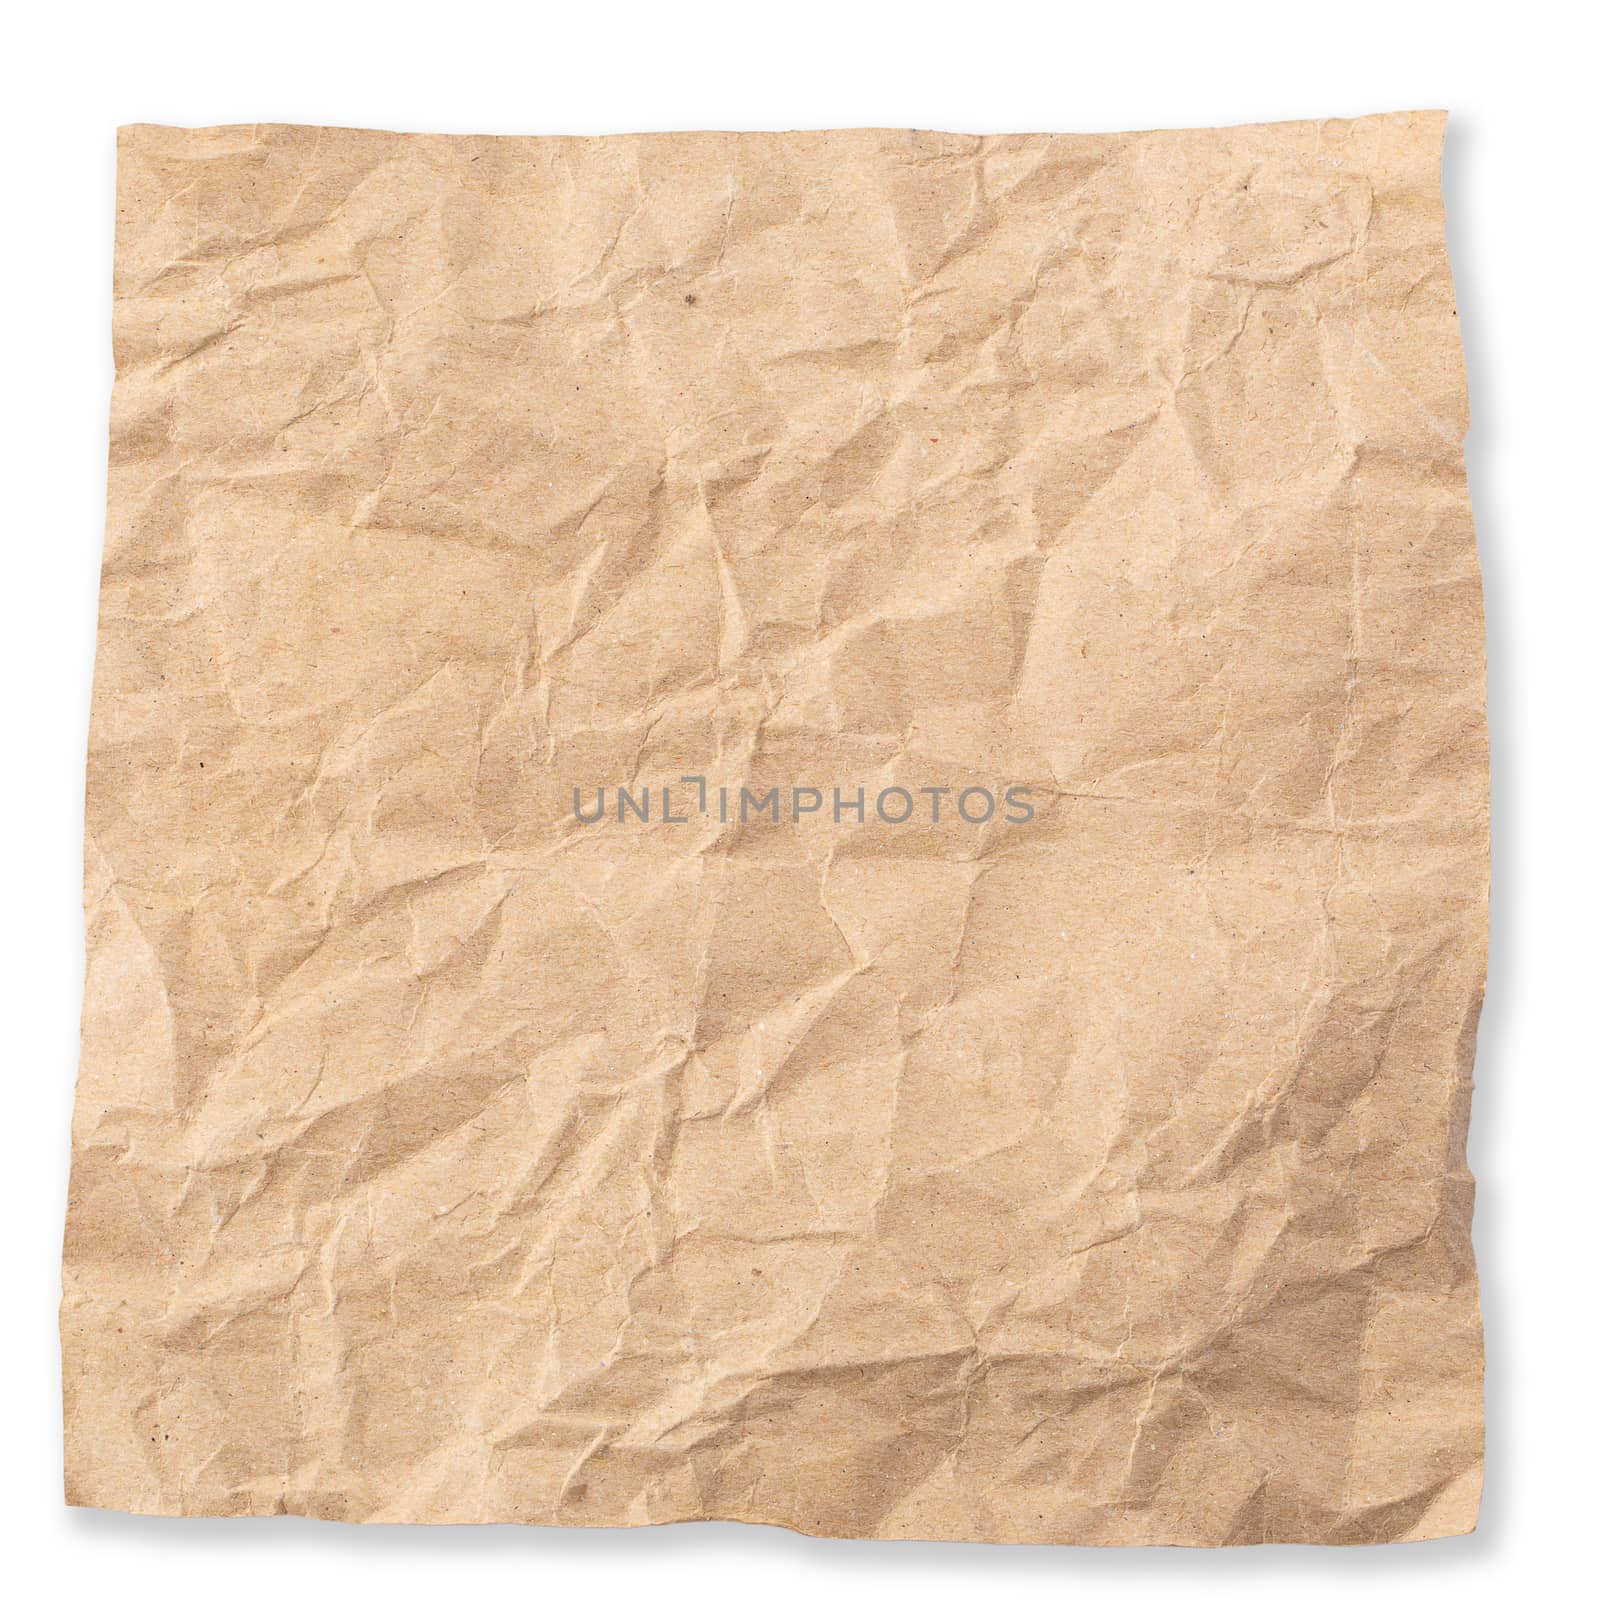 Used brown paper a isolated on white background.